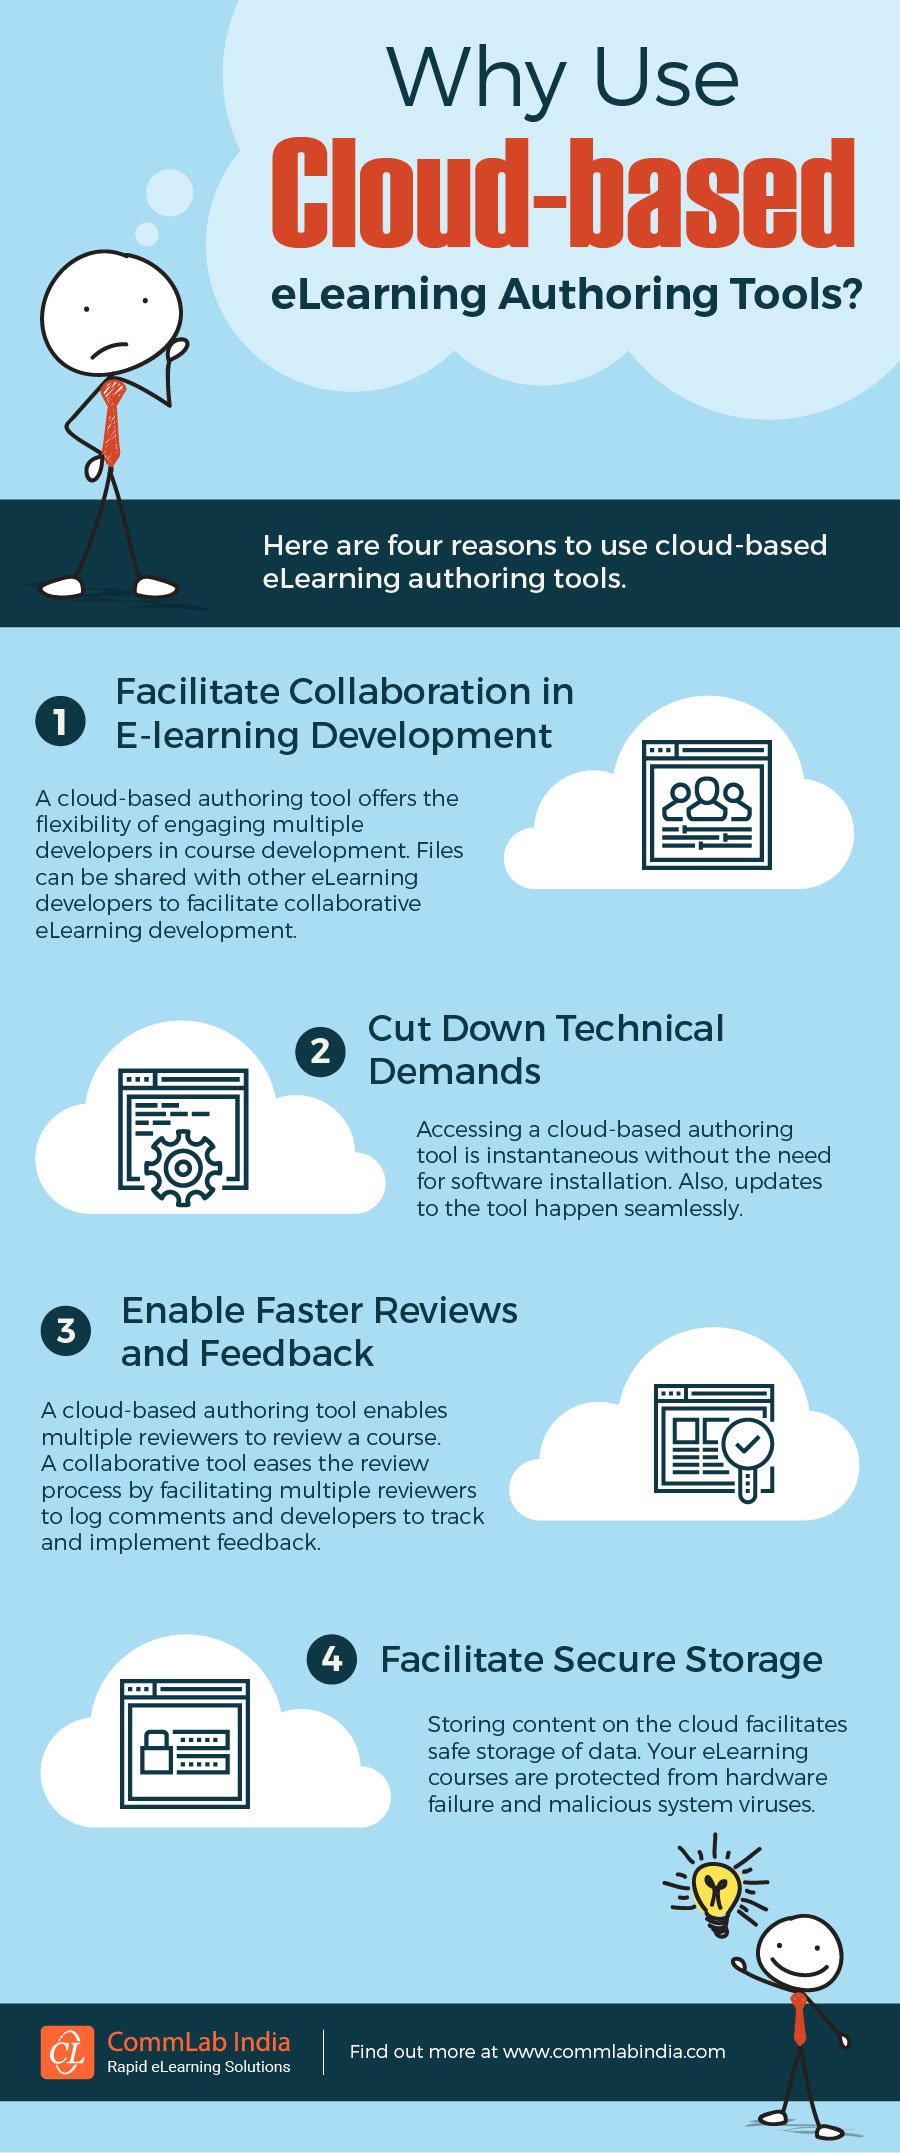 Why Use Cloud-based eLearning Authoring Tools? [Infographic]